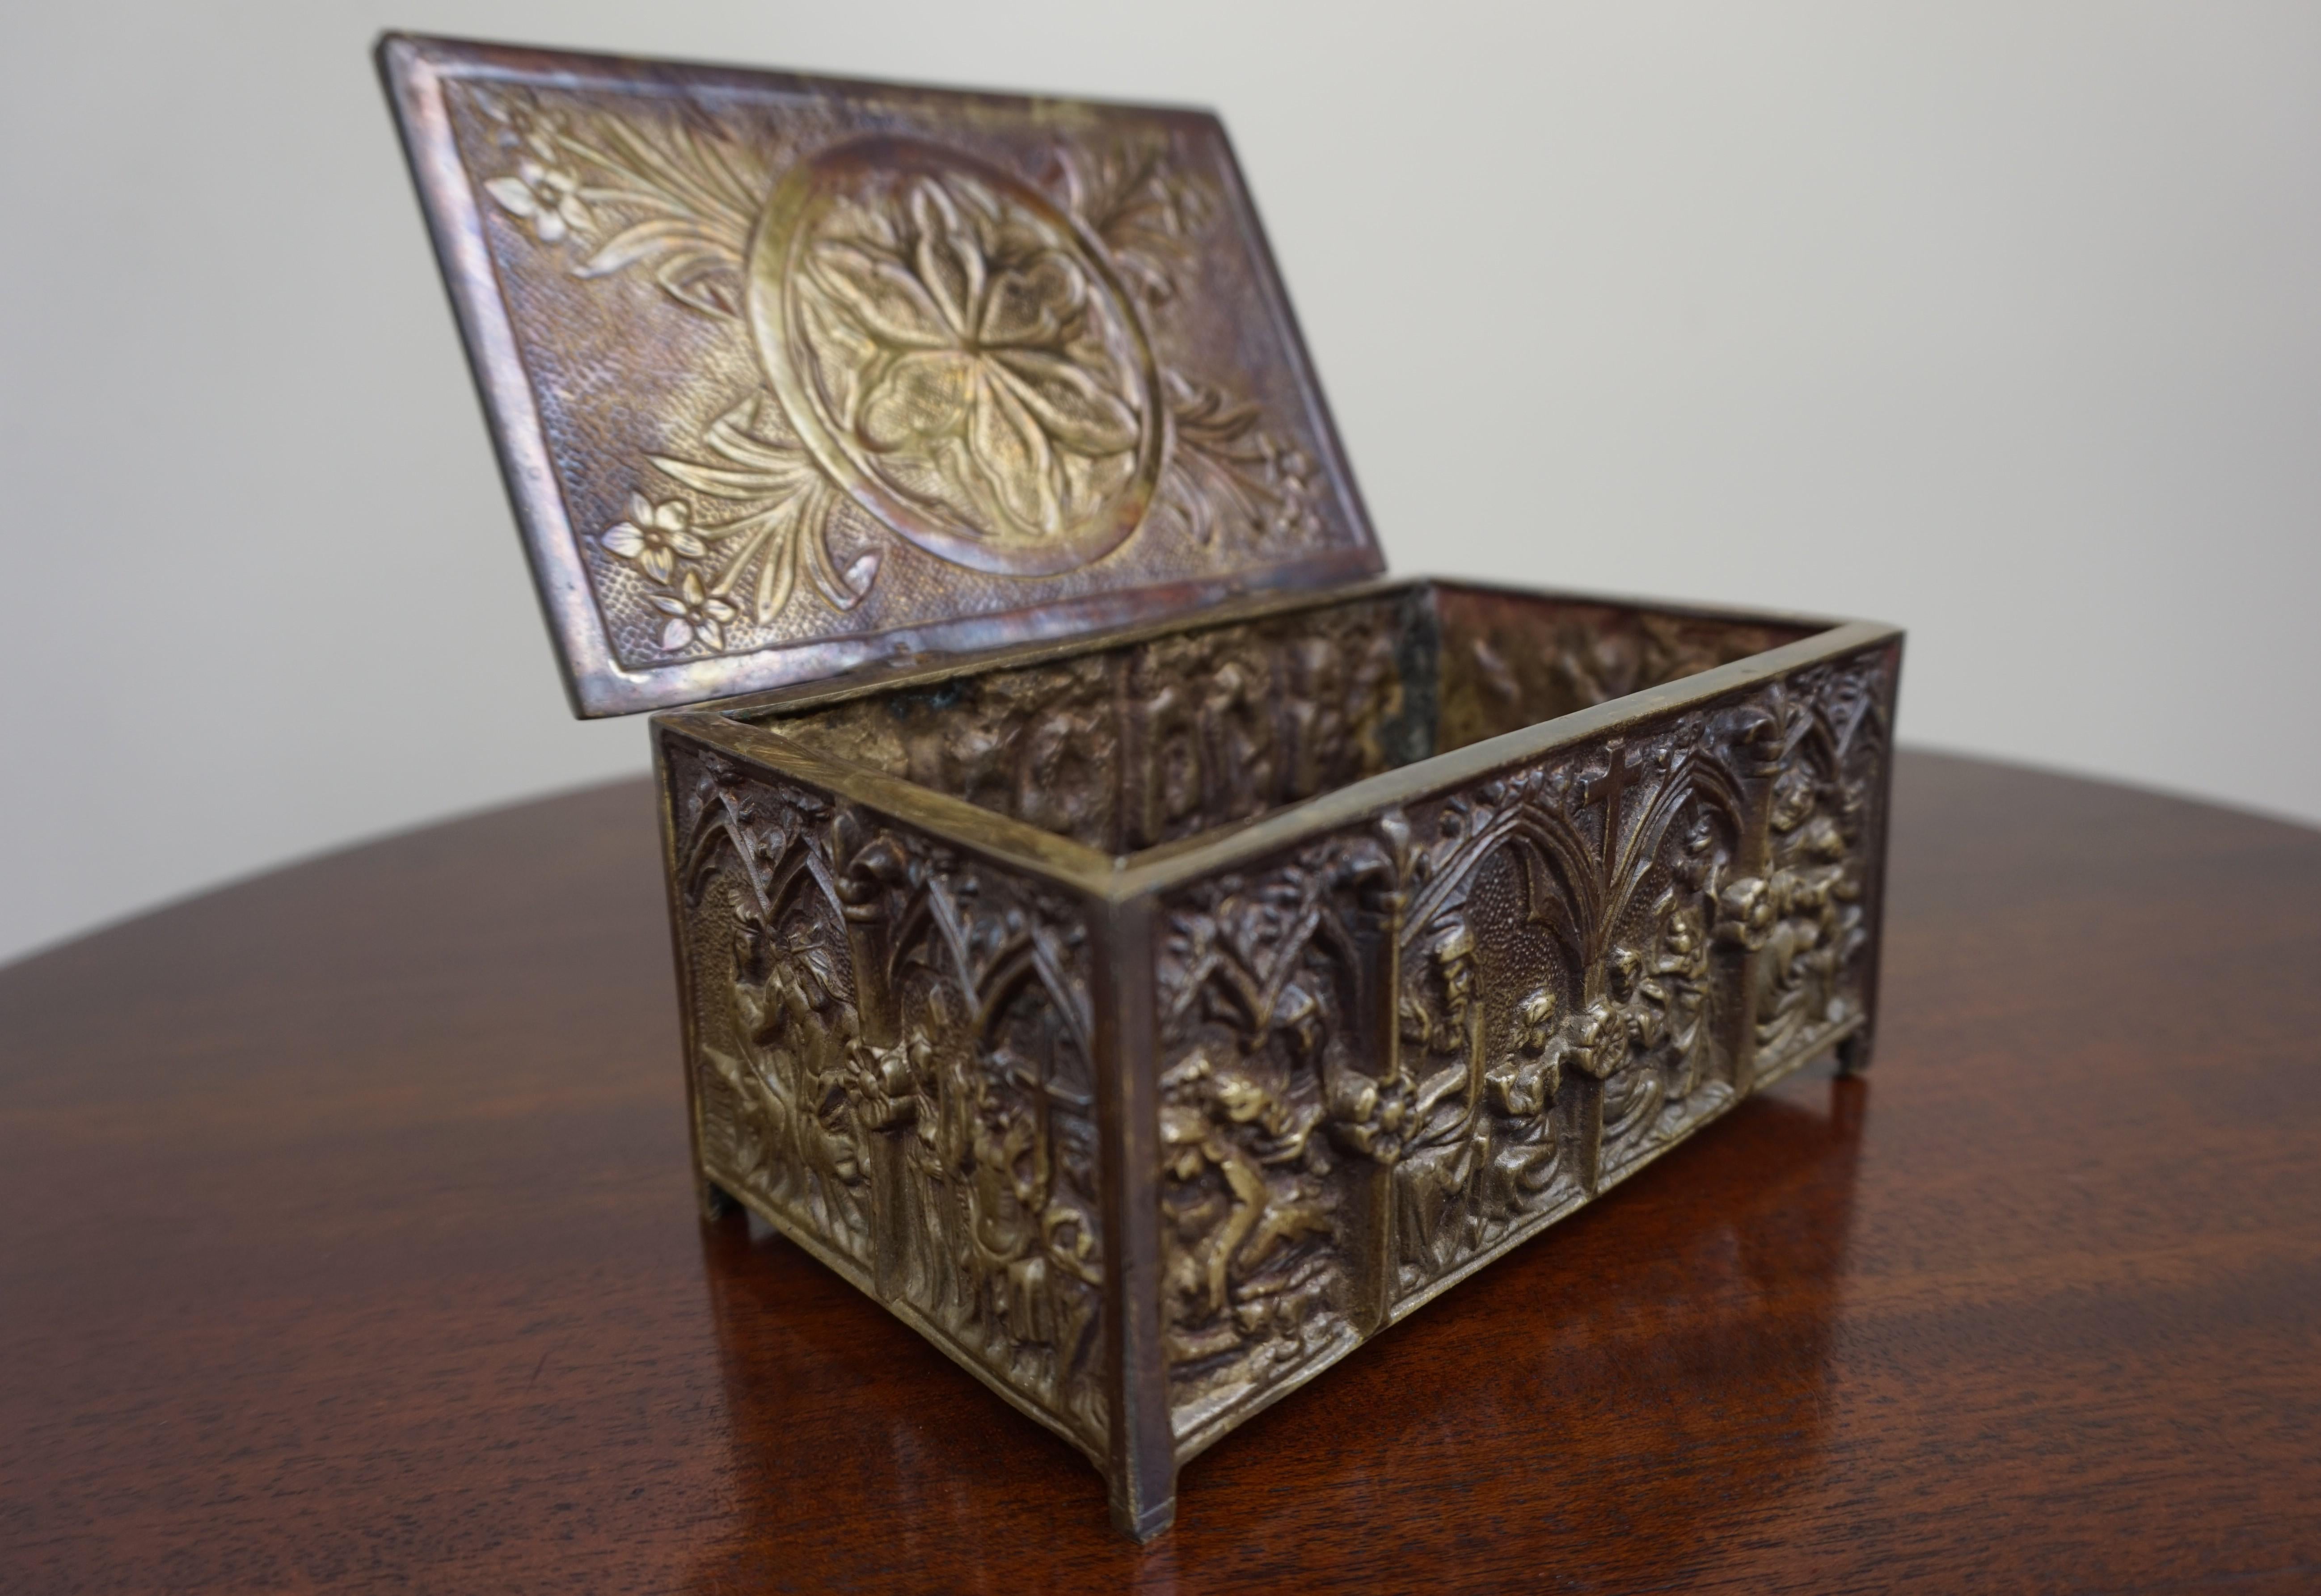 Gothic Revival Bronze Jewelry Box with Biblical Scenes in Church Window Panels 1